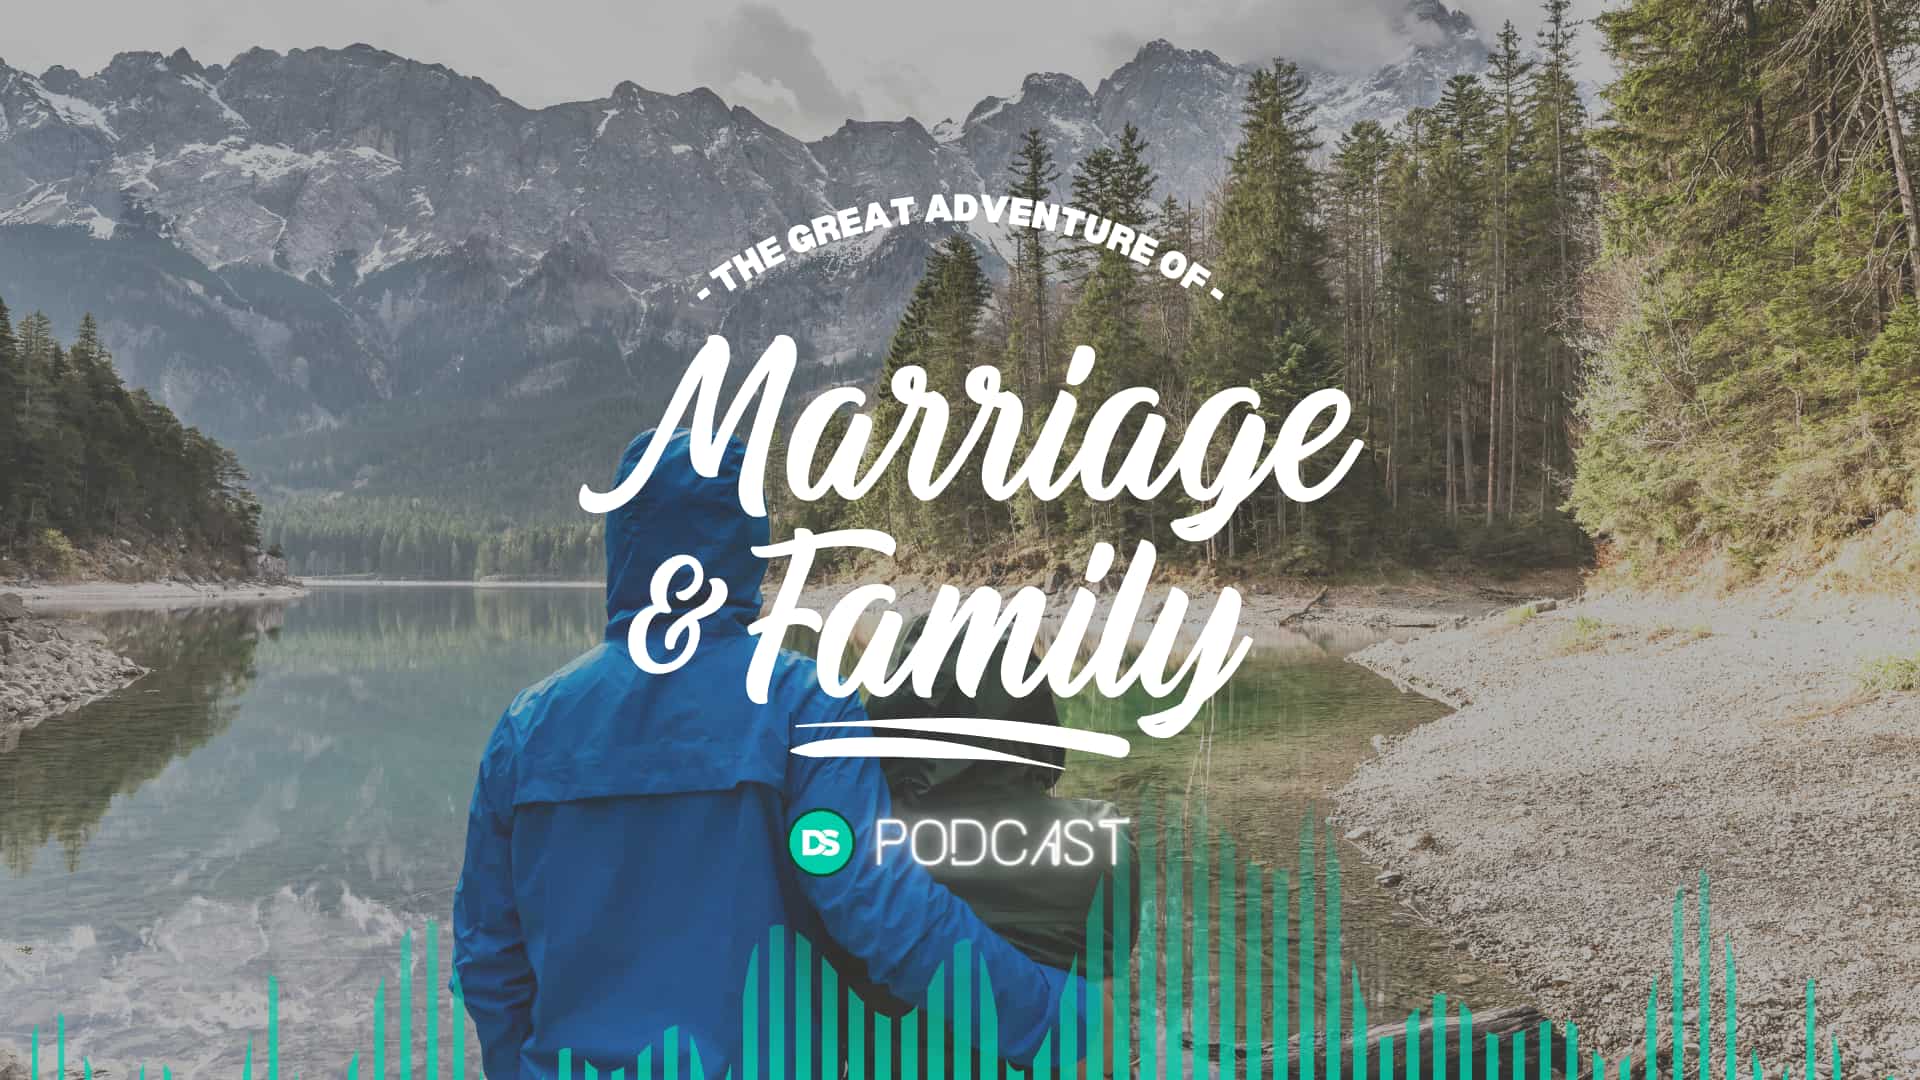 The Great Adventure of Marriage and Family 2